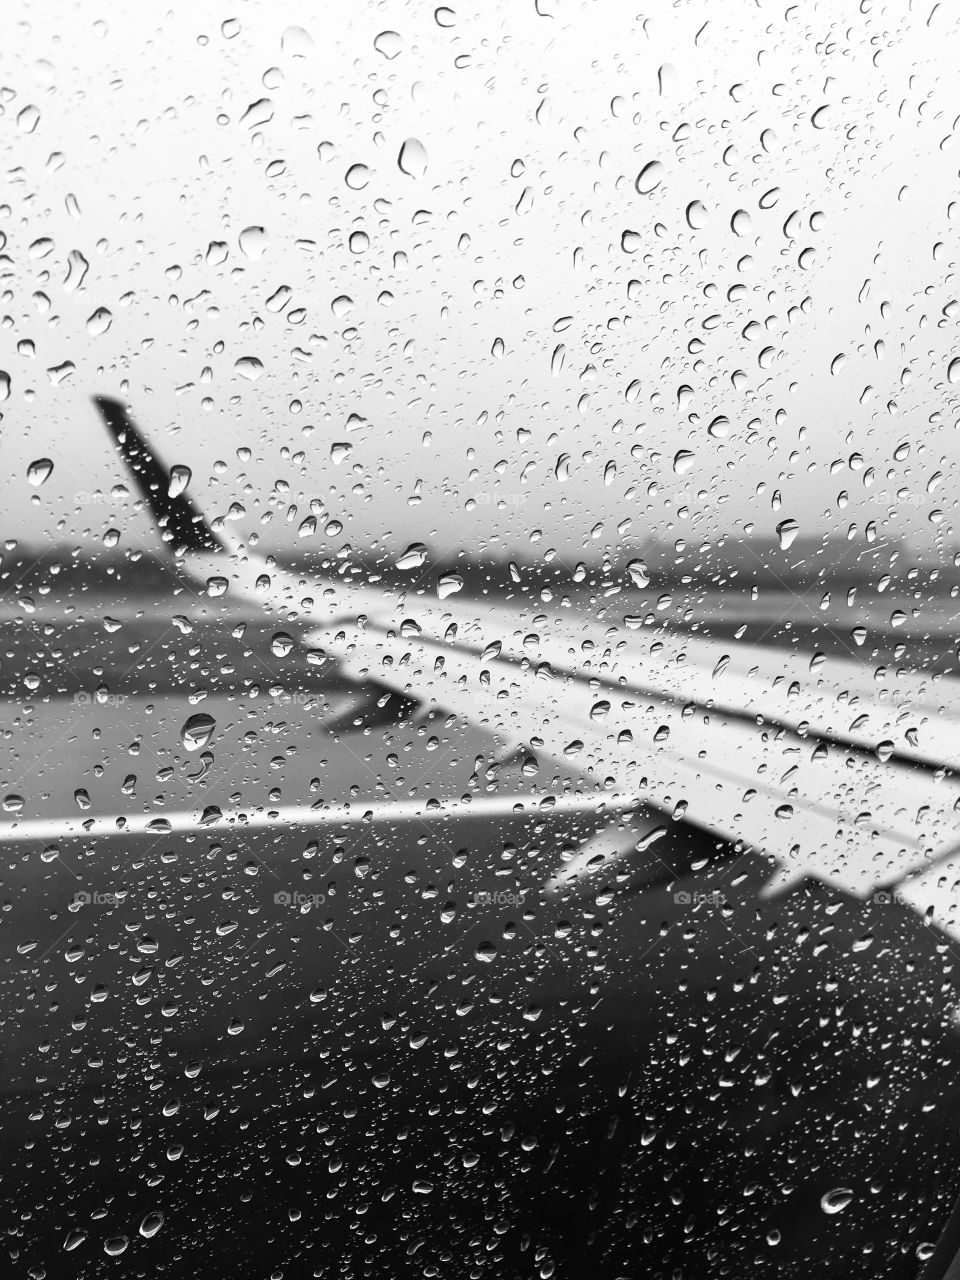 Ready for takeoff on a rainy day 